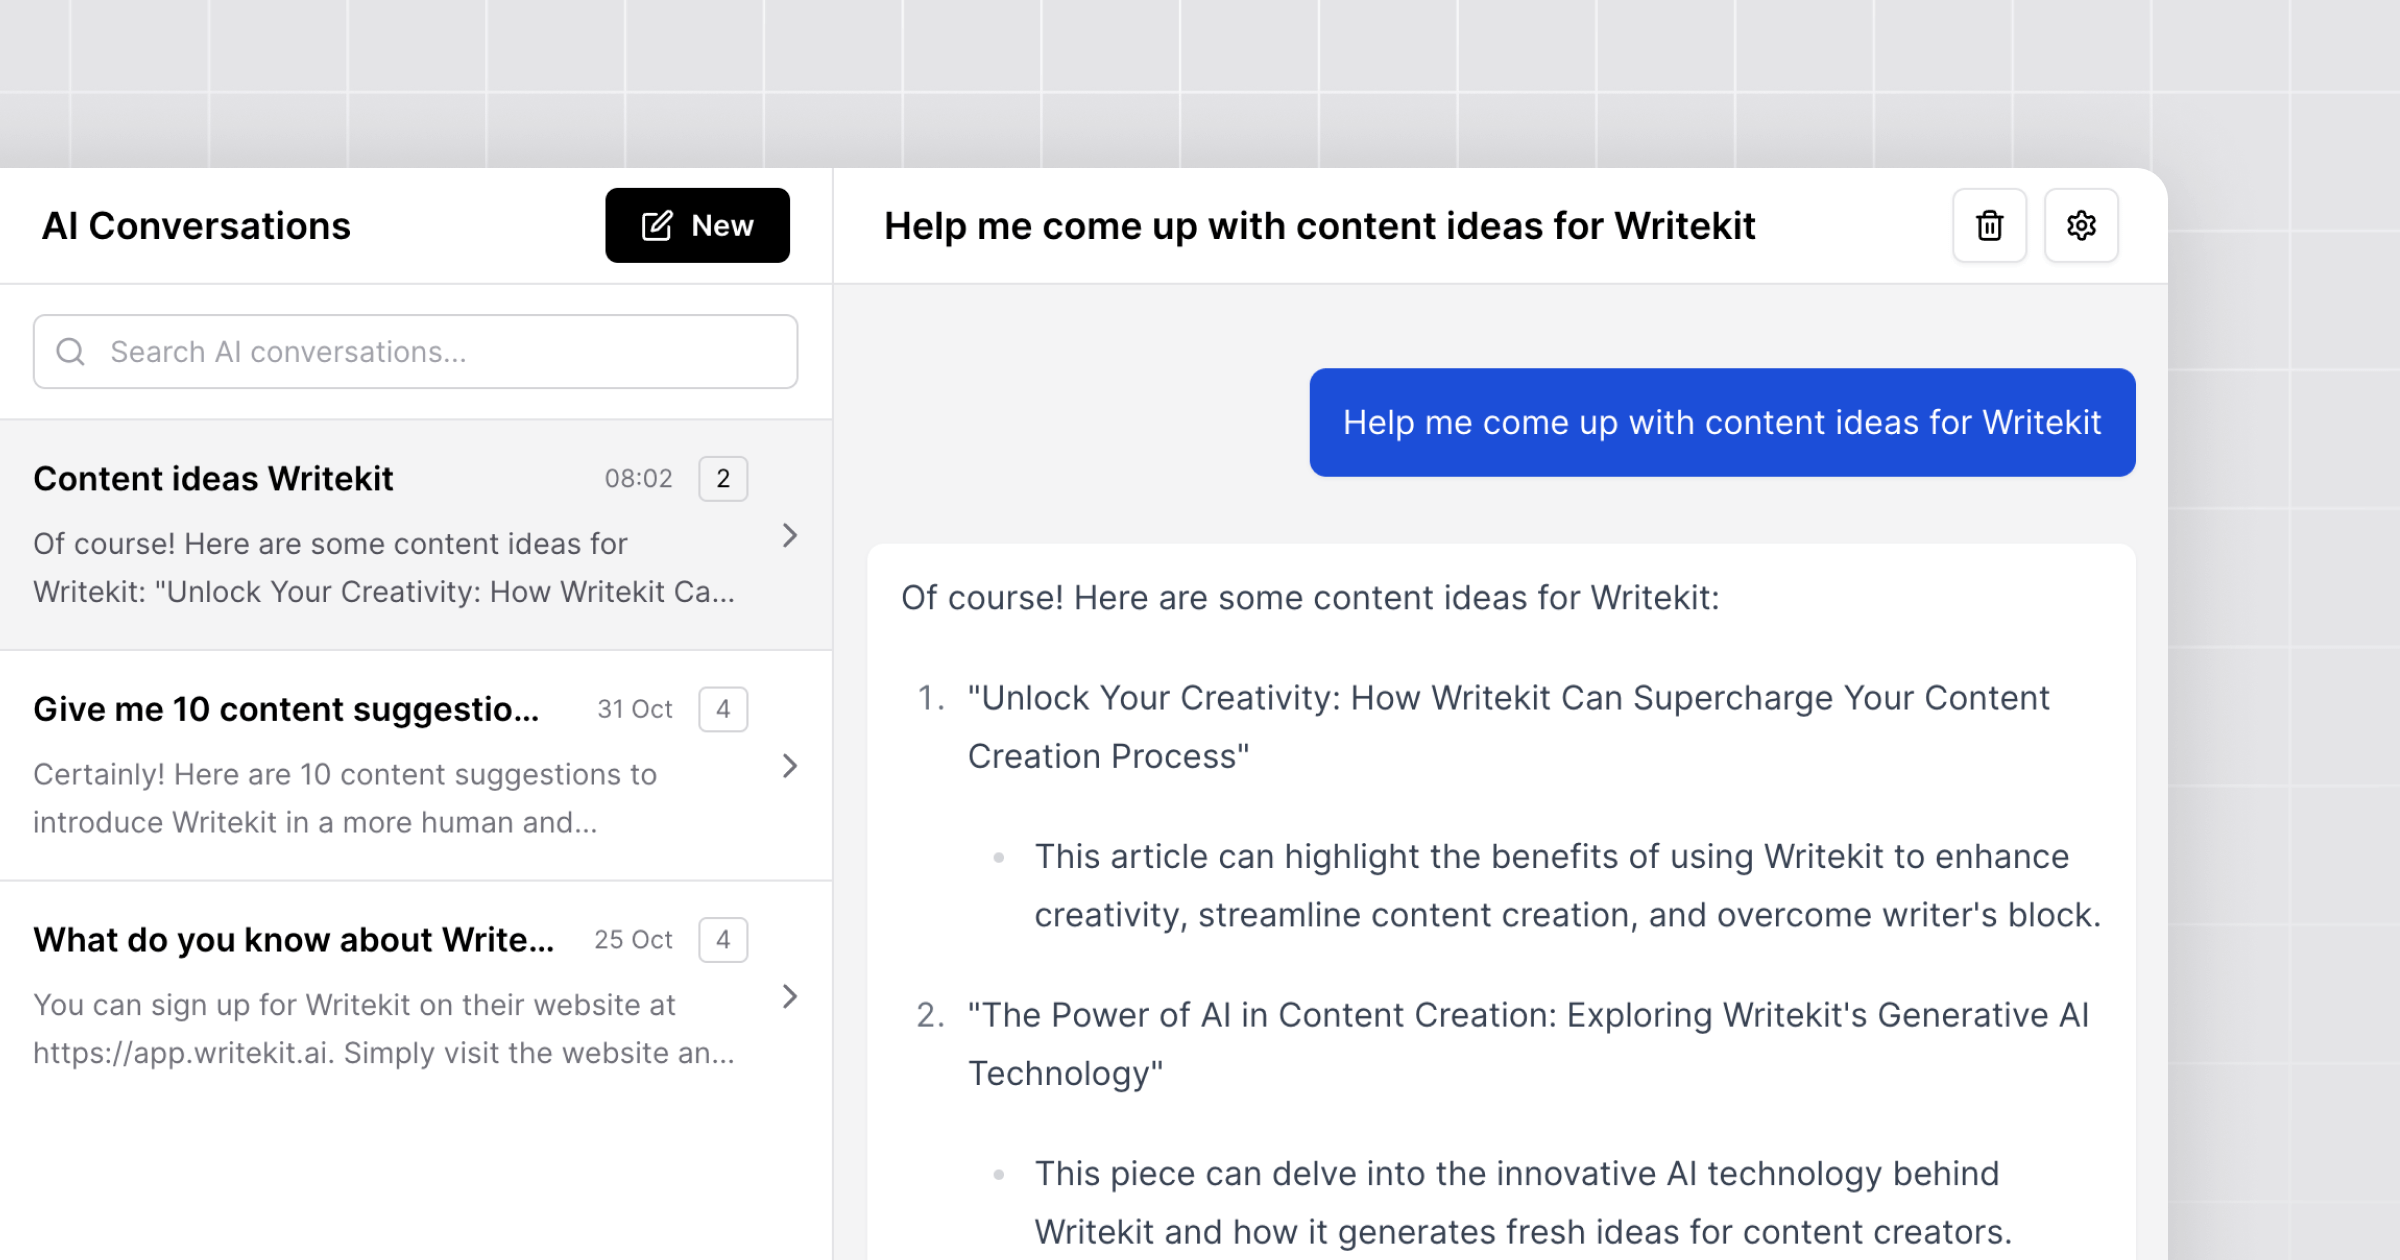 Chat with Writekit AI to Brainstorm Ideas